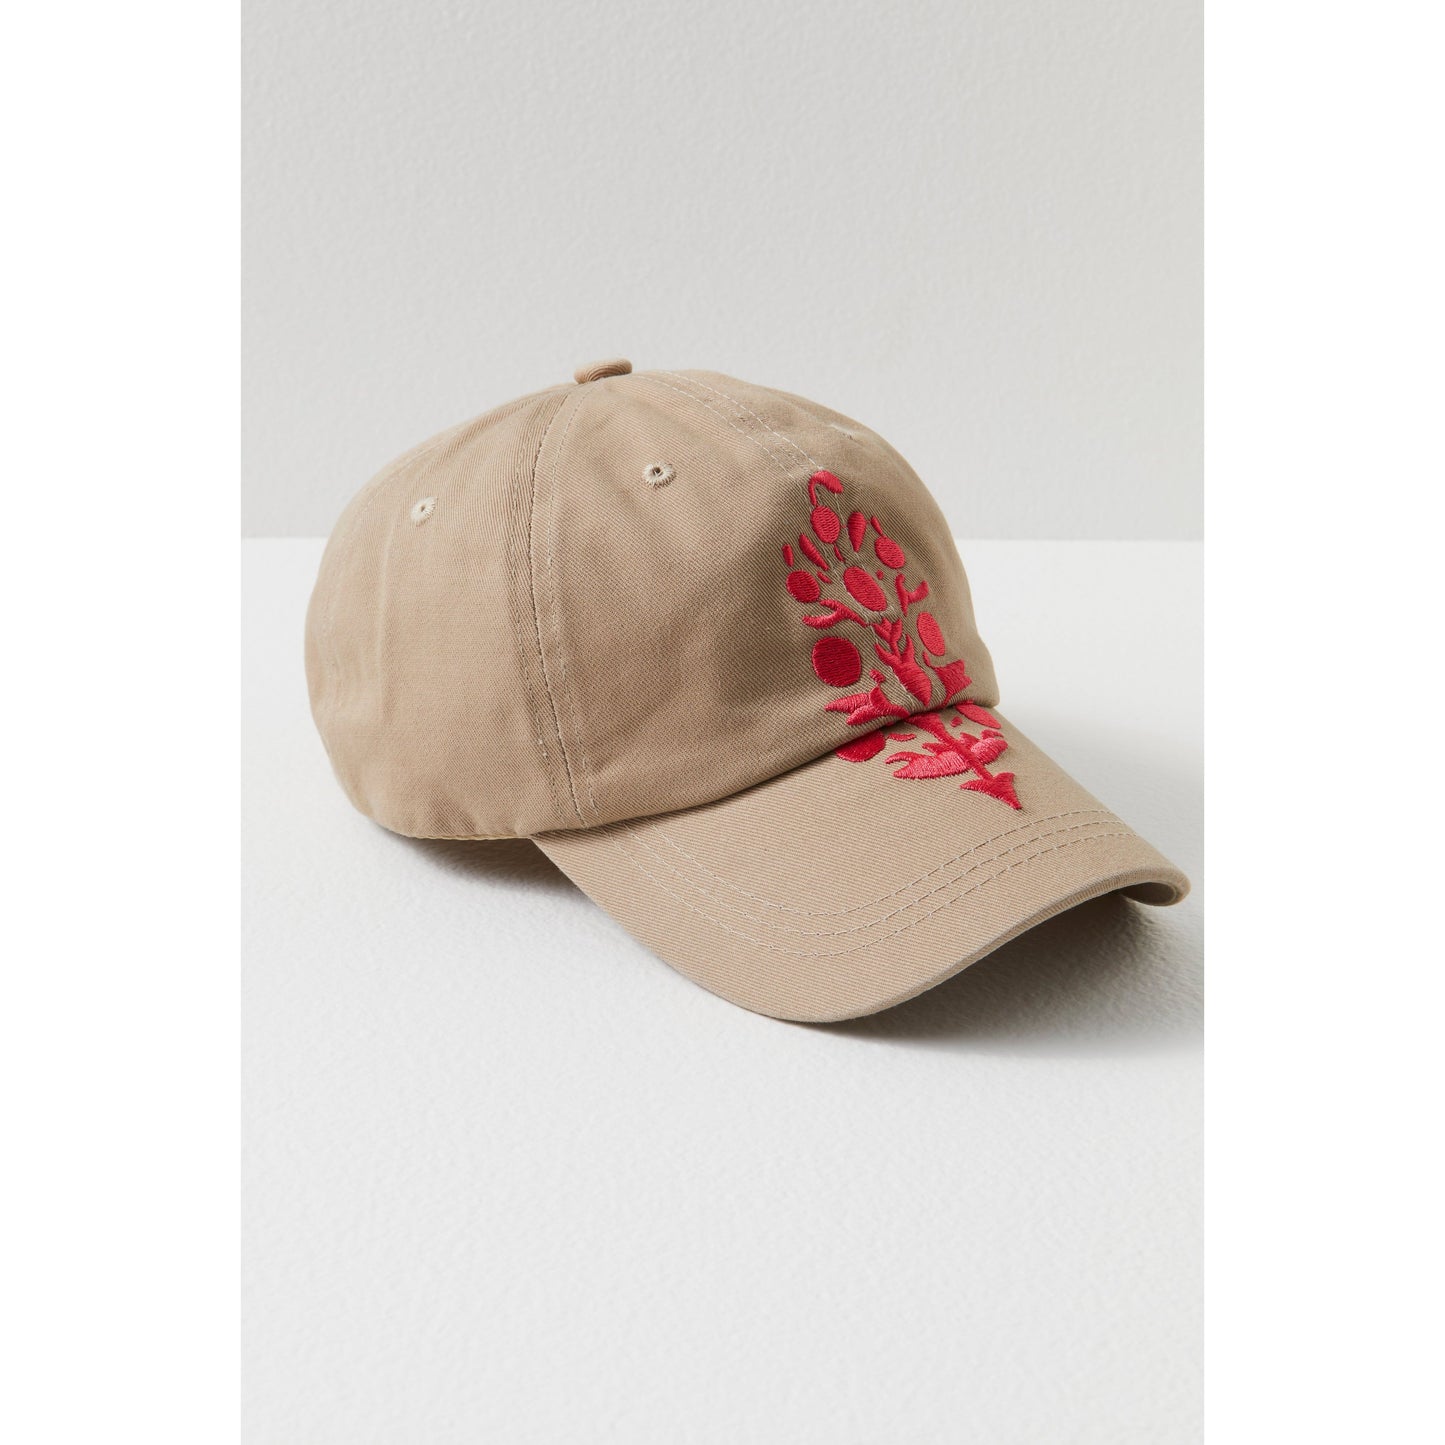 A Sand/Coral Big Buti baseball cap with red floral embroidery on the left side, displayed on a white surface by Free People Movement.